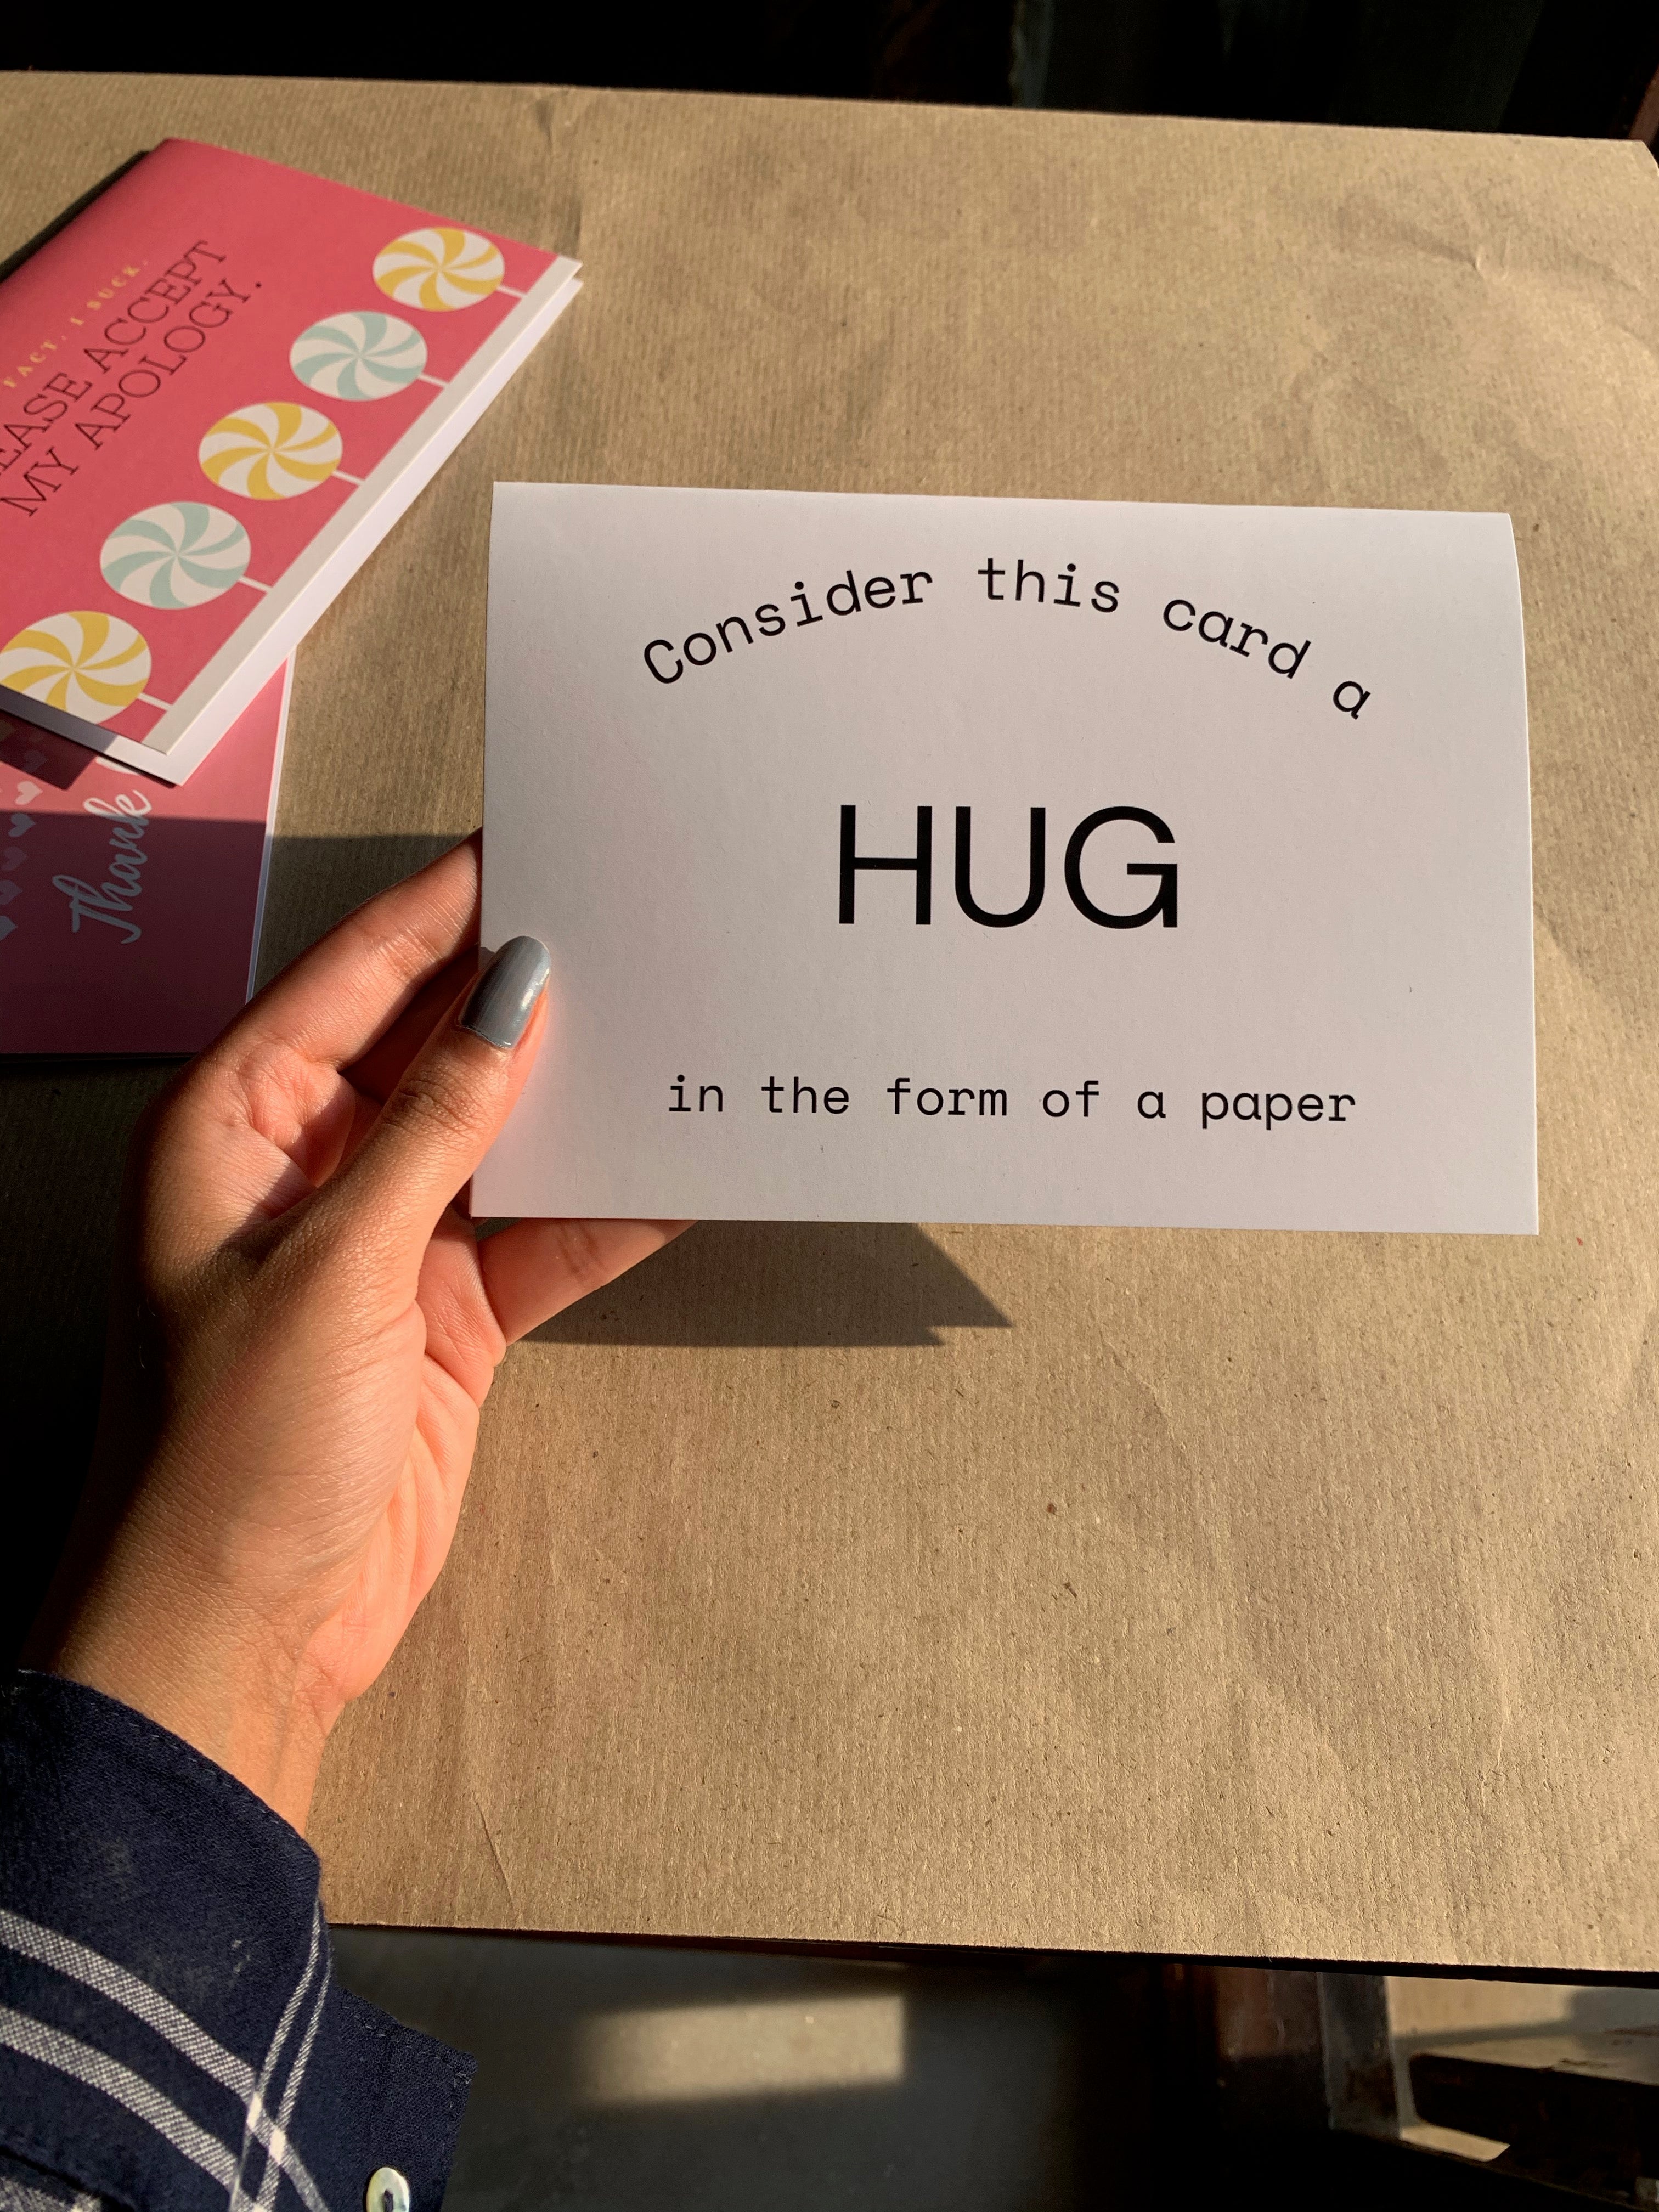 Hug in form of paper card